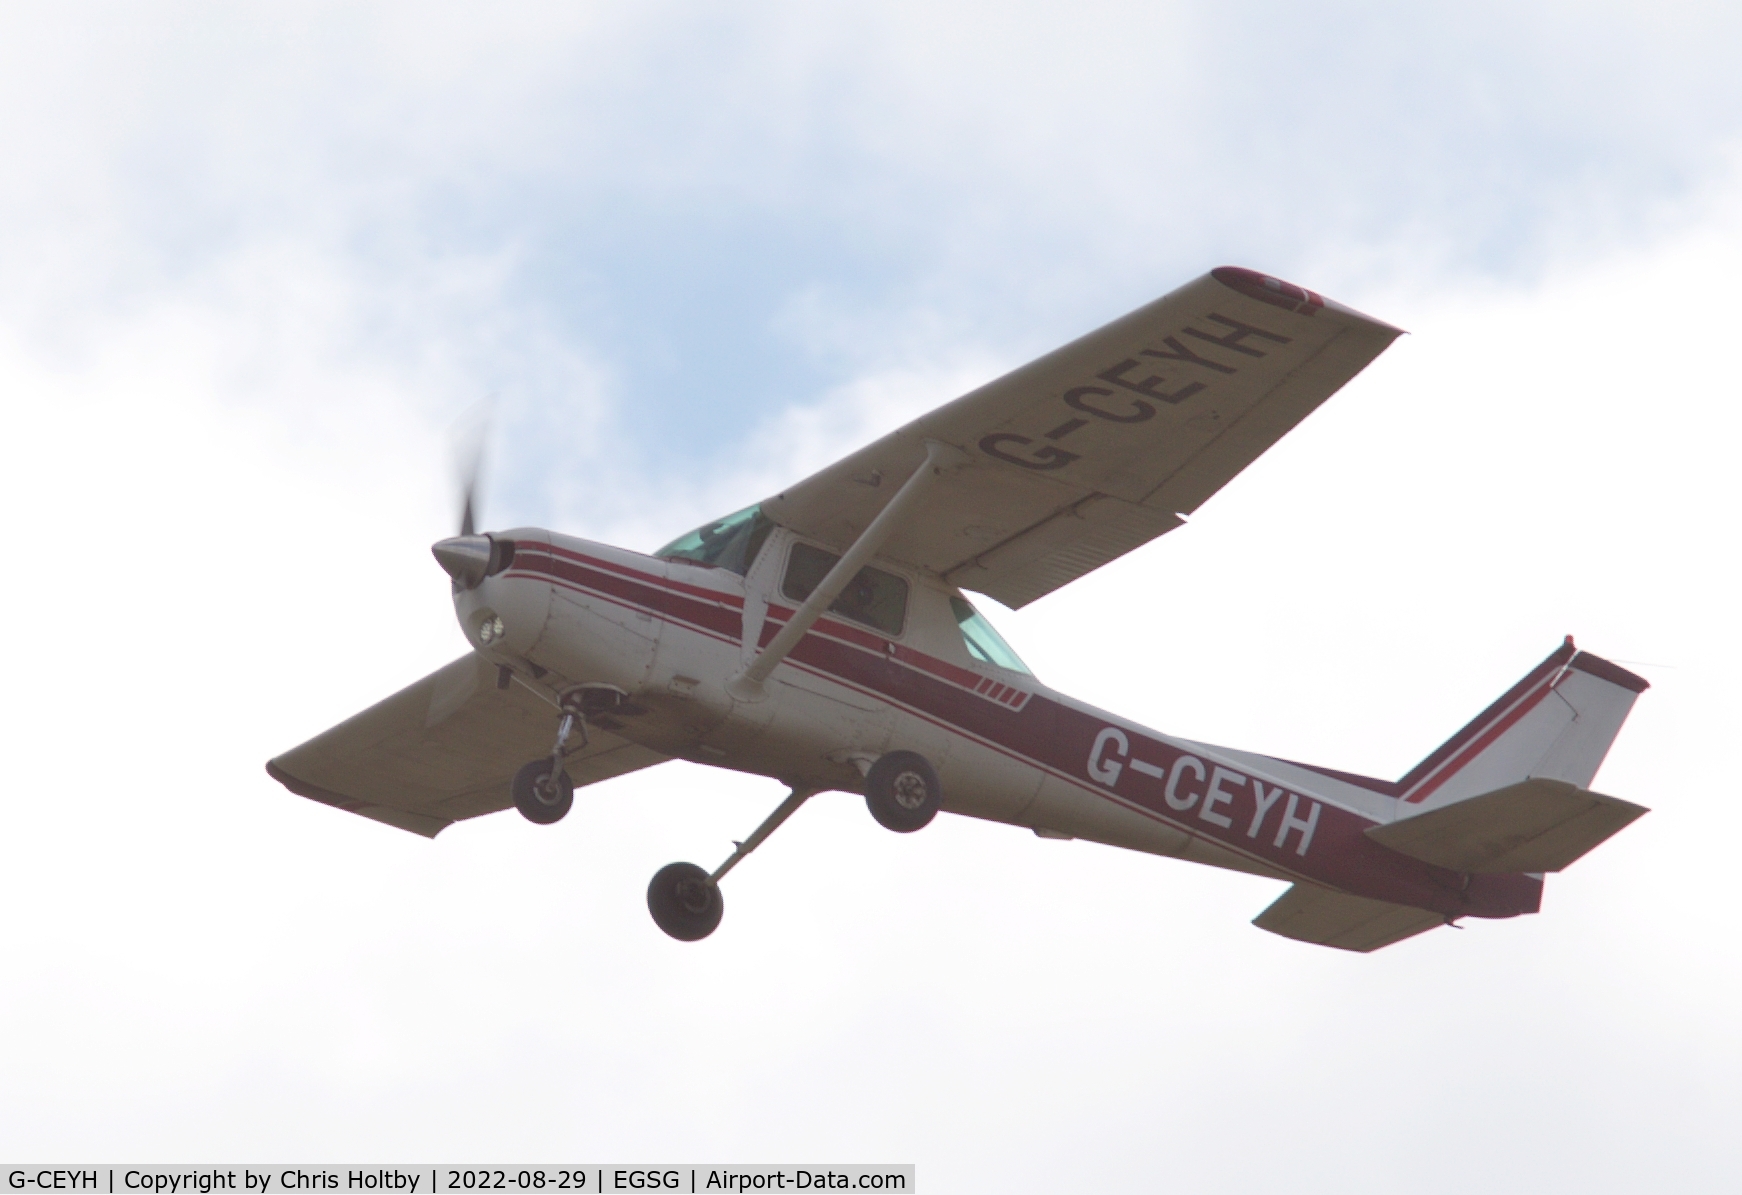 G-CEYH, 1978 Cessna 152 C/N 15282689, Over its base at Stapleford Tawney, Essex